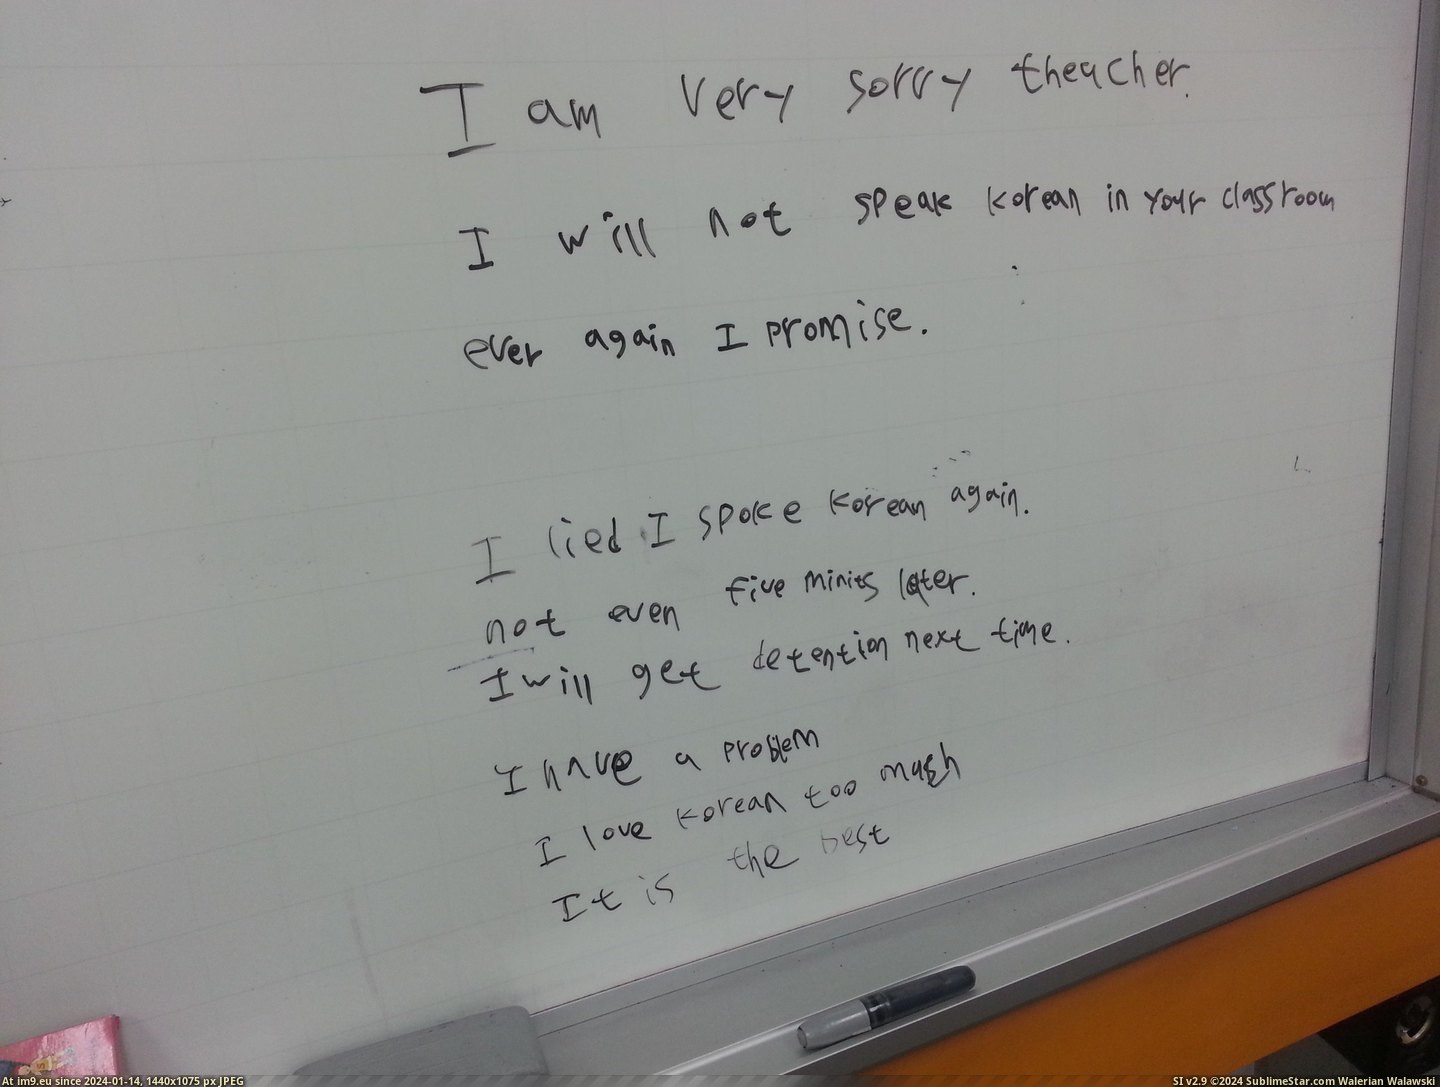 #Funny #Was #Work #School #Stopped #Speaking #Whiteboard #Kids #Class #English #Korean [Funny] I work at a Korean English school where we recently stopped kids from speaking Korean in class. This was my whiteboard t Pic. (Bild von album My r/FUNNY favs))